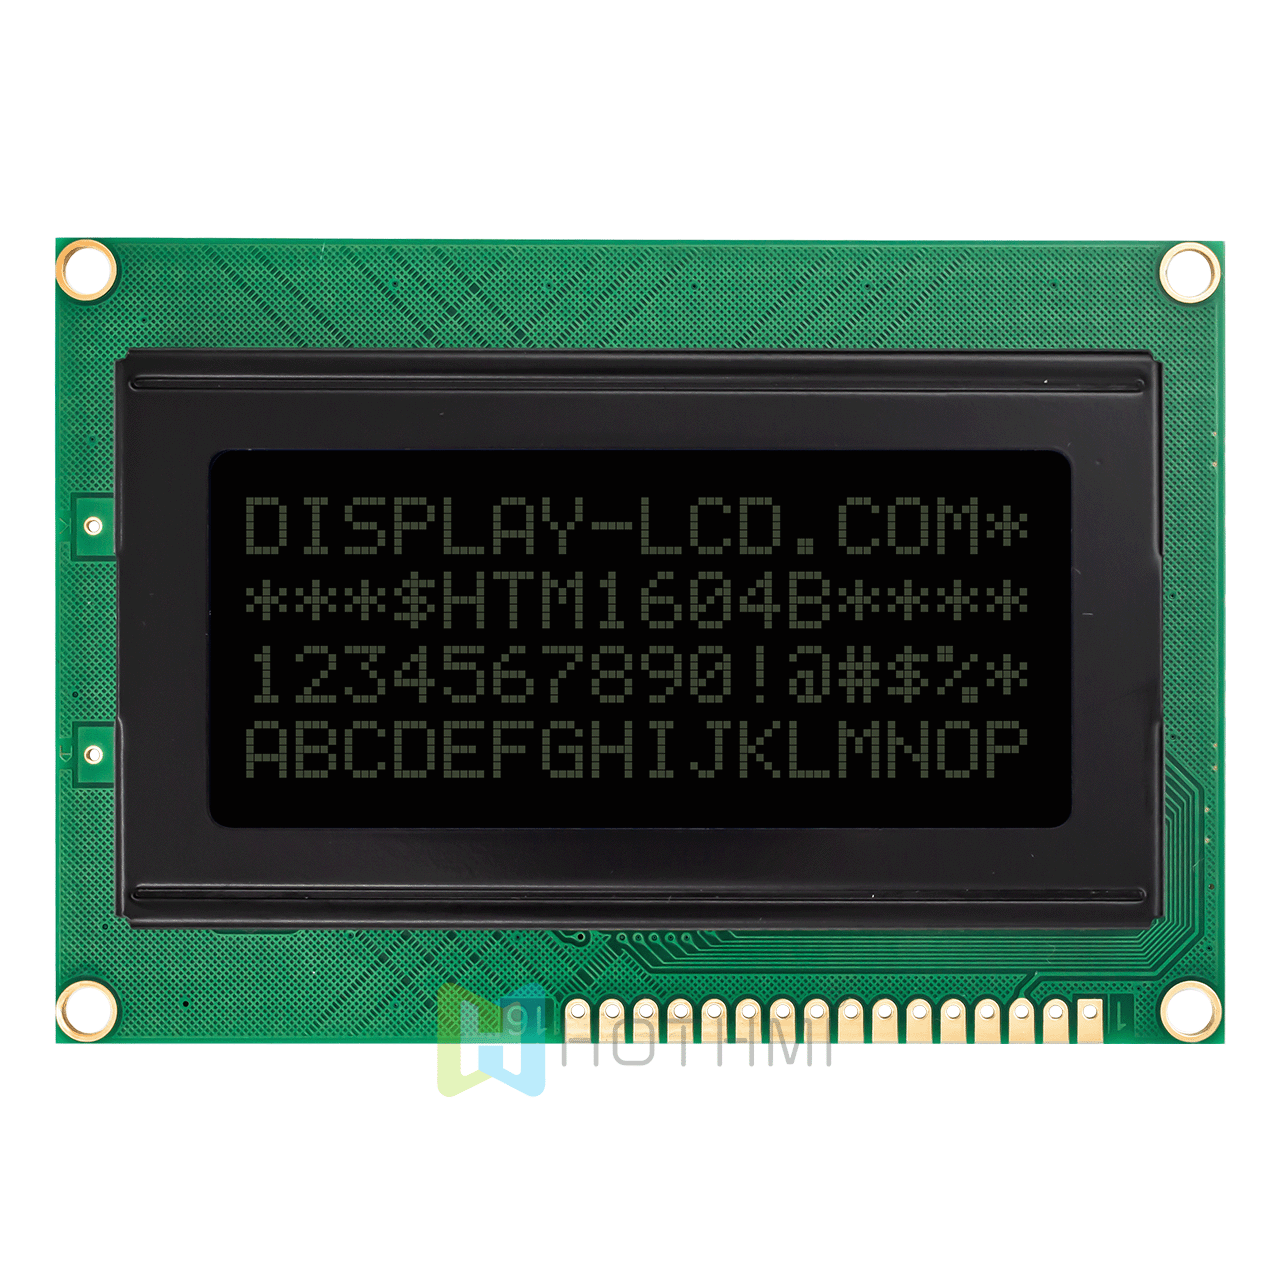 4x16 character LCD Module | DSTN(-) white side backlit monochrome LCD display | Arduino | MCU interface | ST7066U controller | transflective | white text on black background